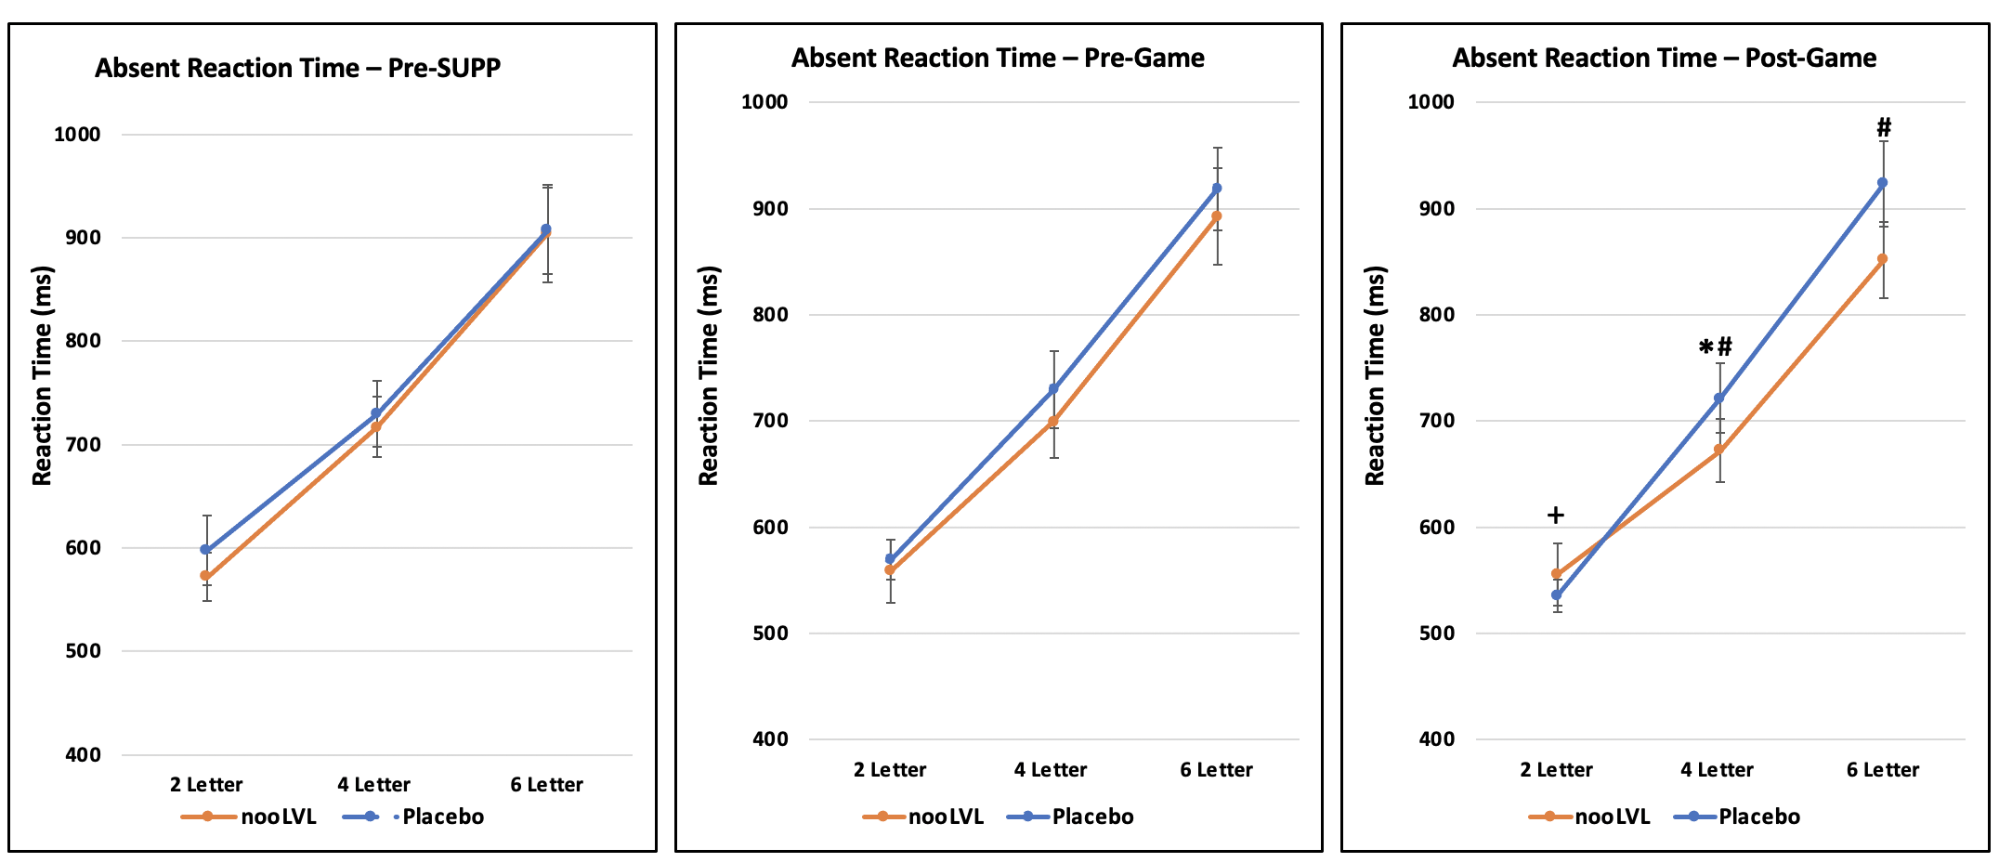 nooLVL Absent Reaction Time Results